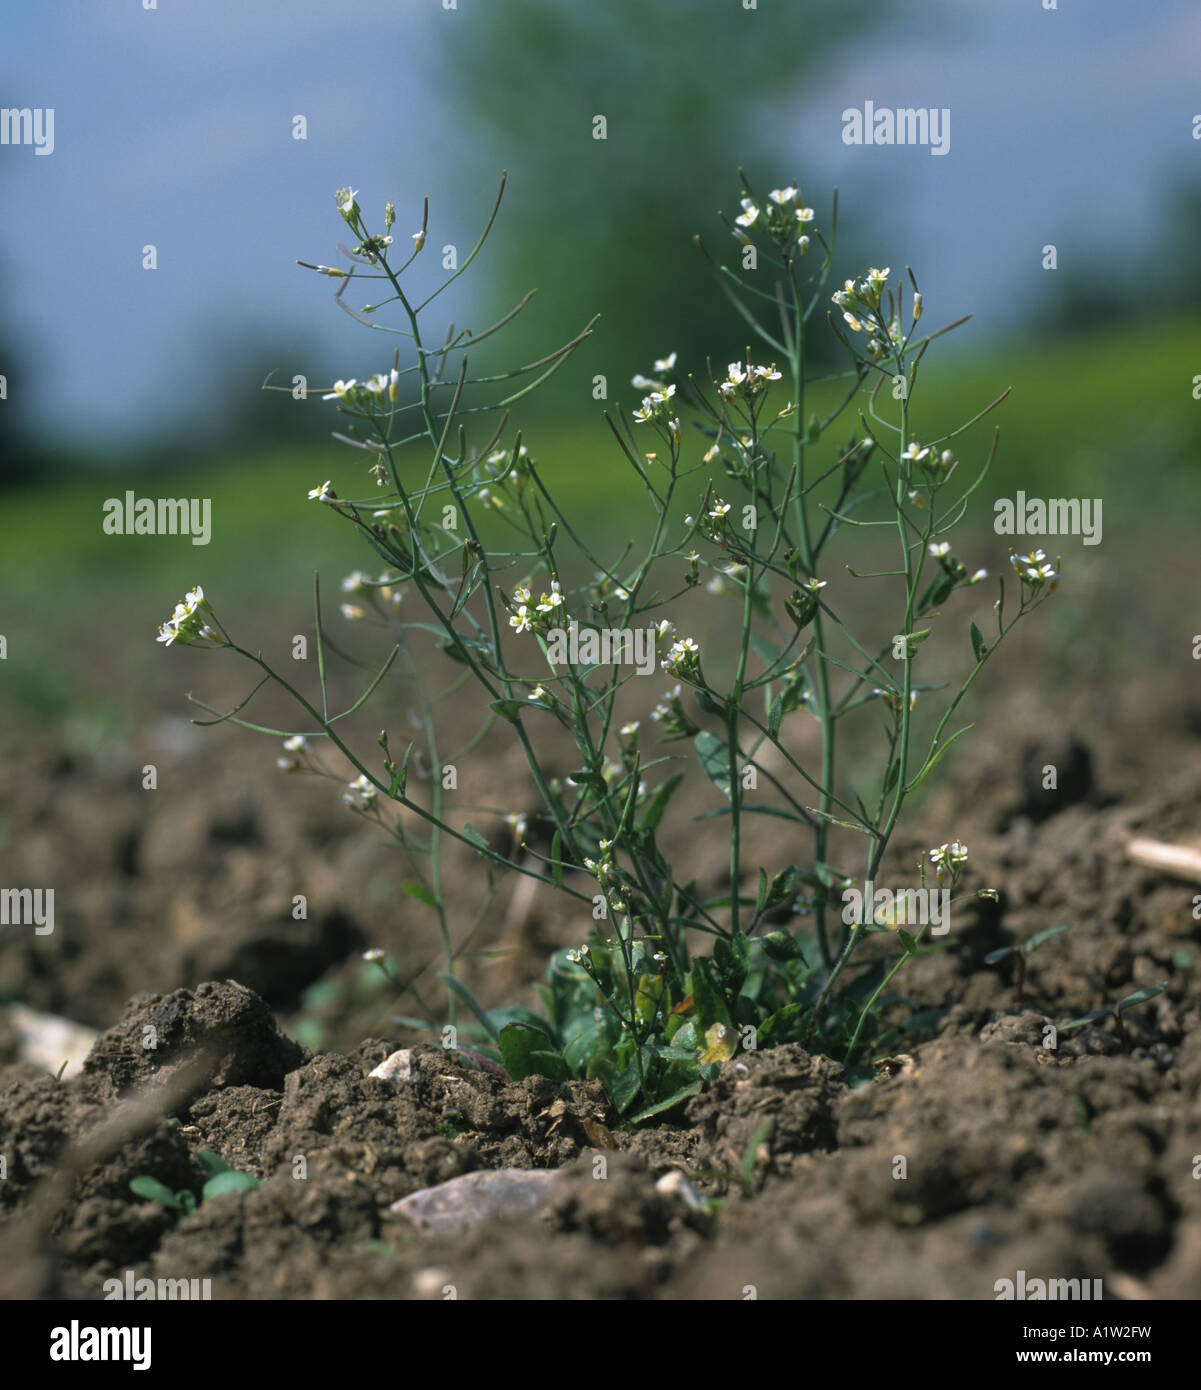 Thale cresss or mouse ear cress Arabidopsis thaliana flowering field plant Stock Photo